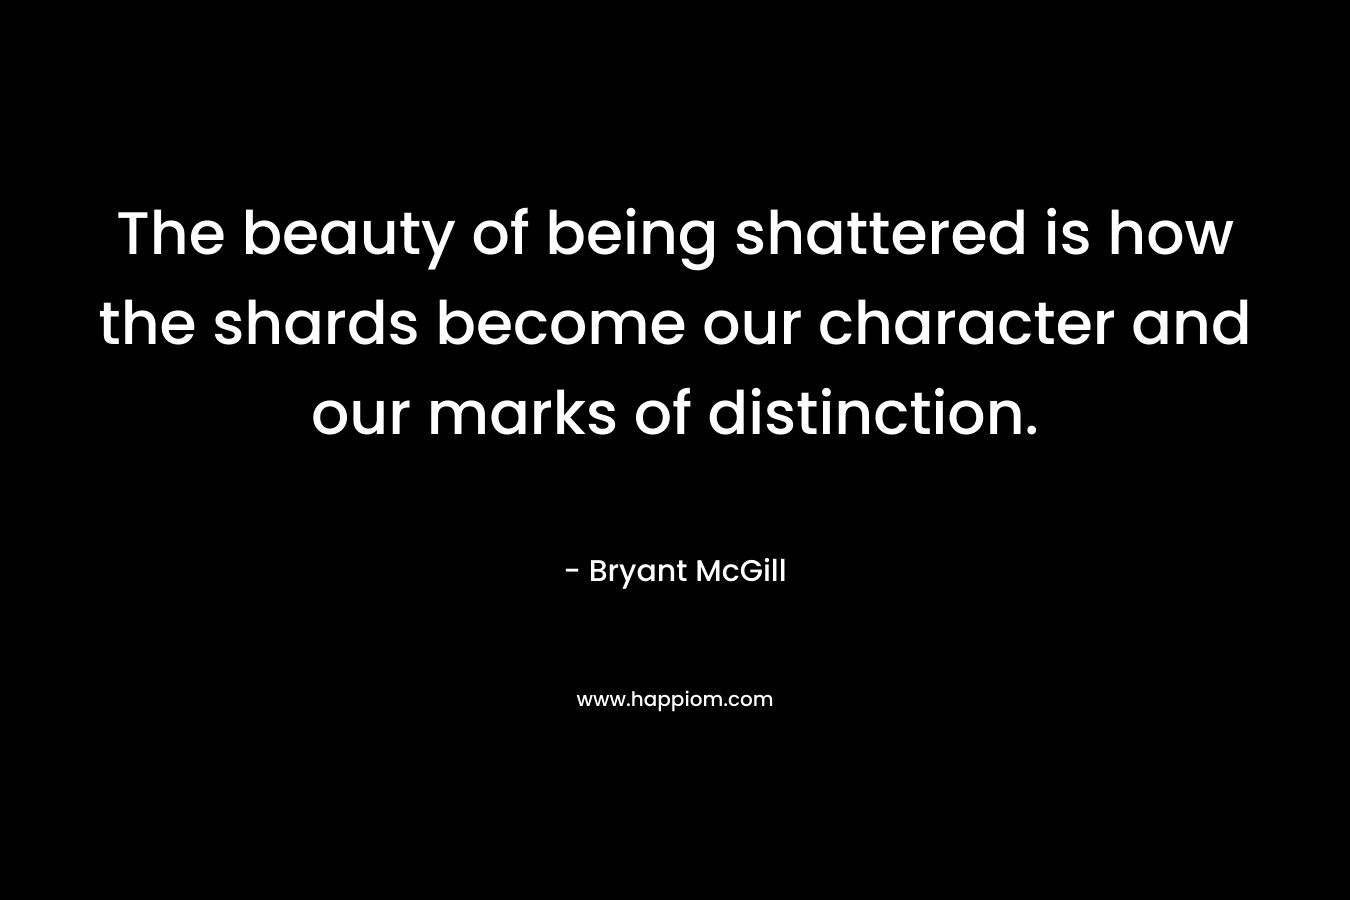 The beauty of being shattered is how the shards become our character and our marks of distinction.